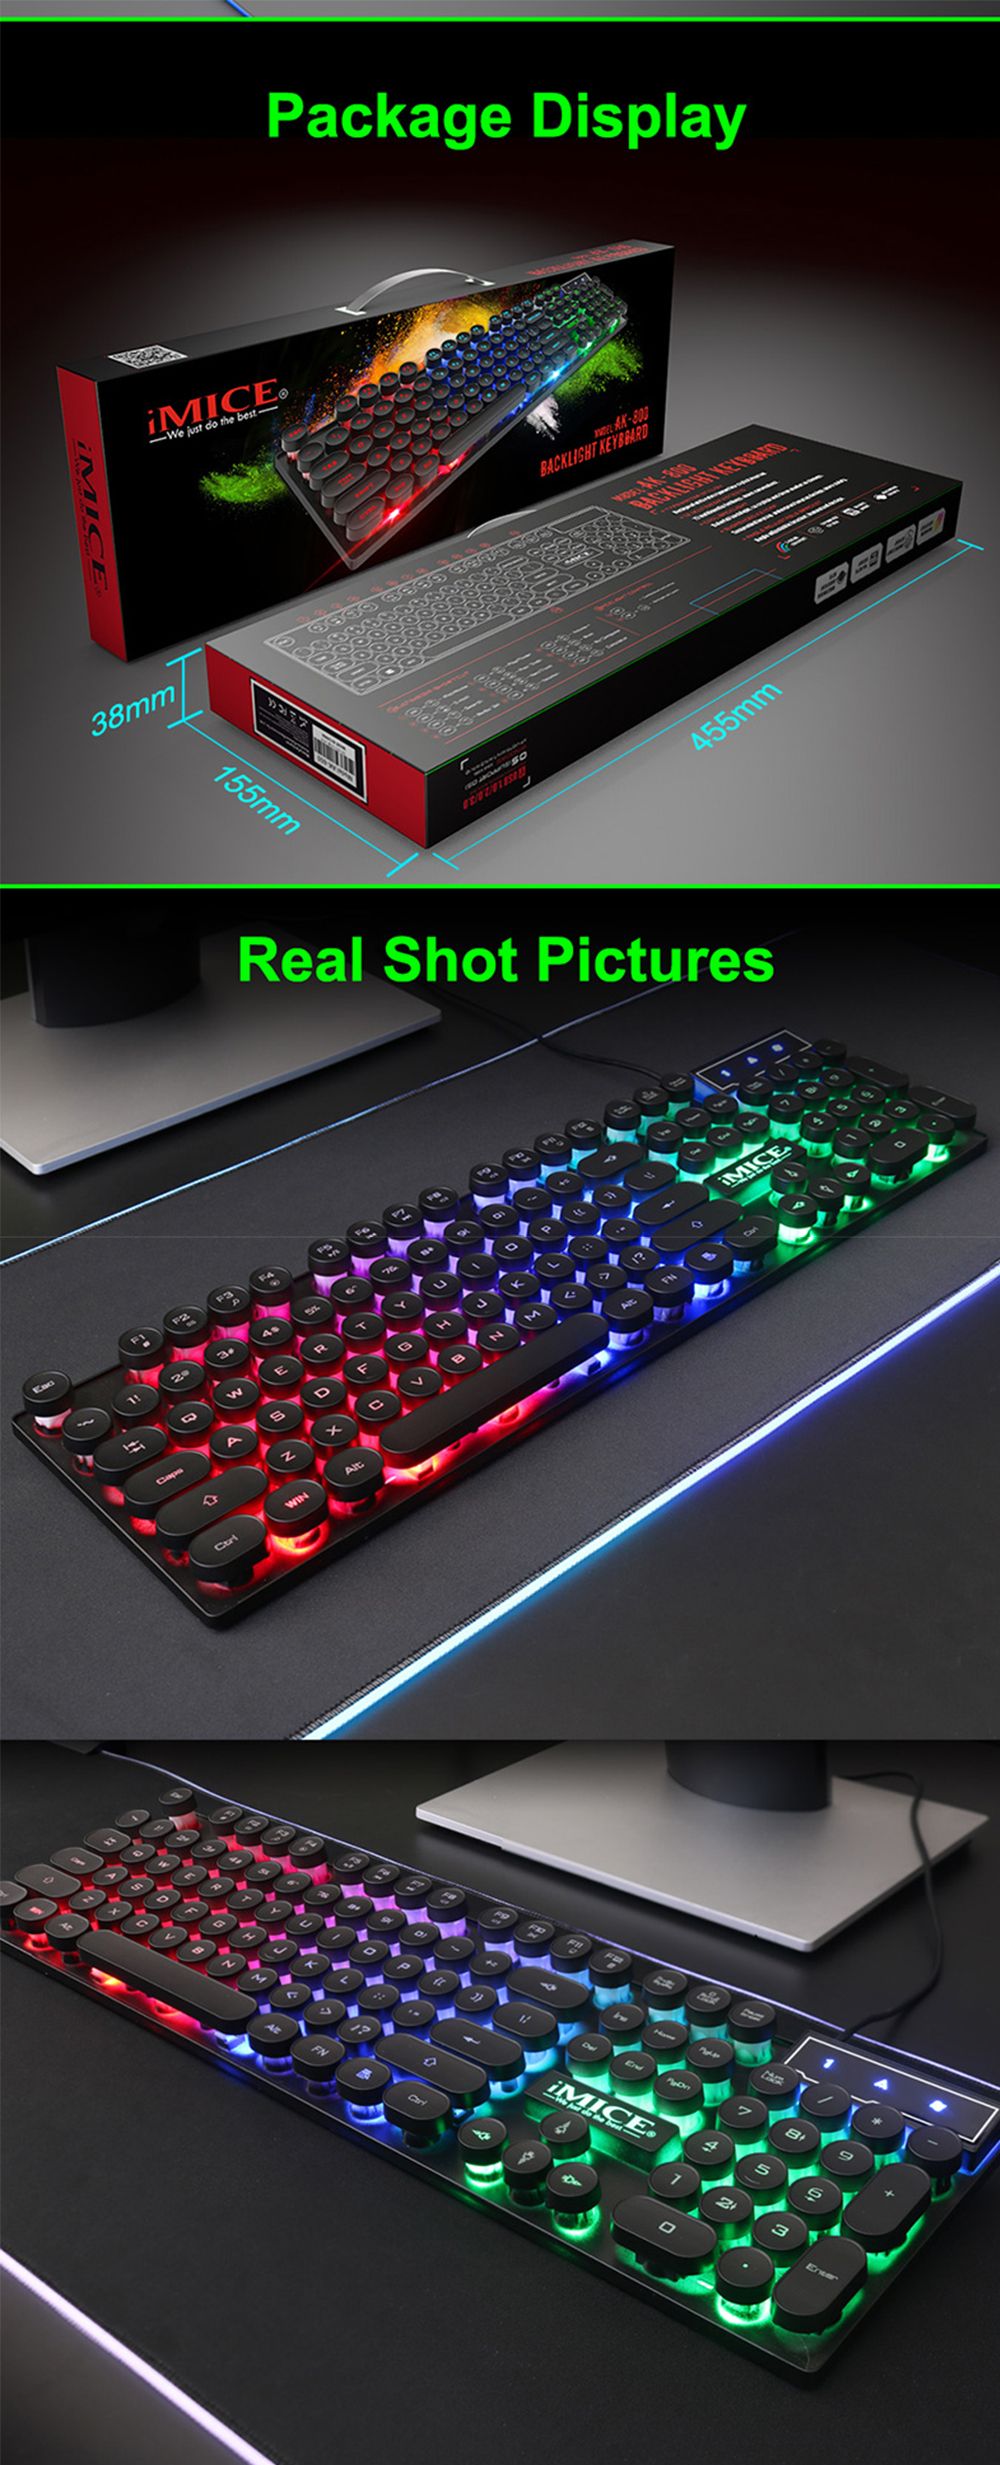 IMICE-AK-800-104-keys-USB-Wired-3-Color-LED-Backlight-Suspended-Round-Cap-Gaming-Keyboard-1575910